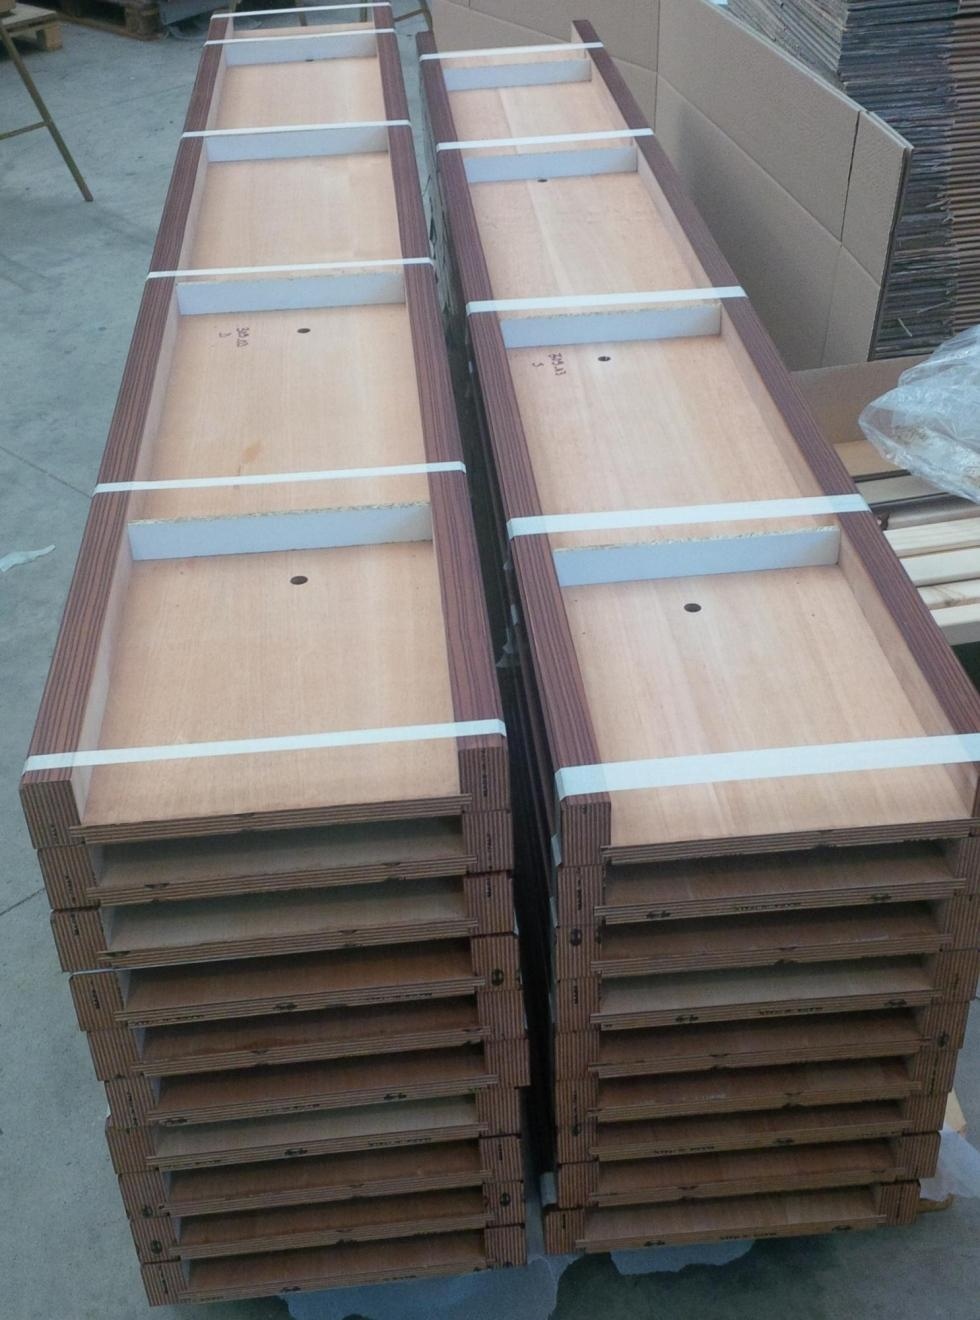 Timber and semi-finished products